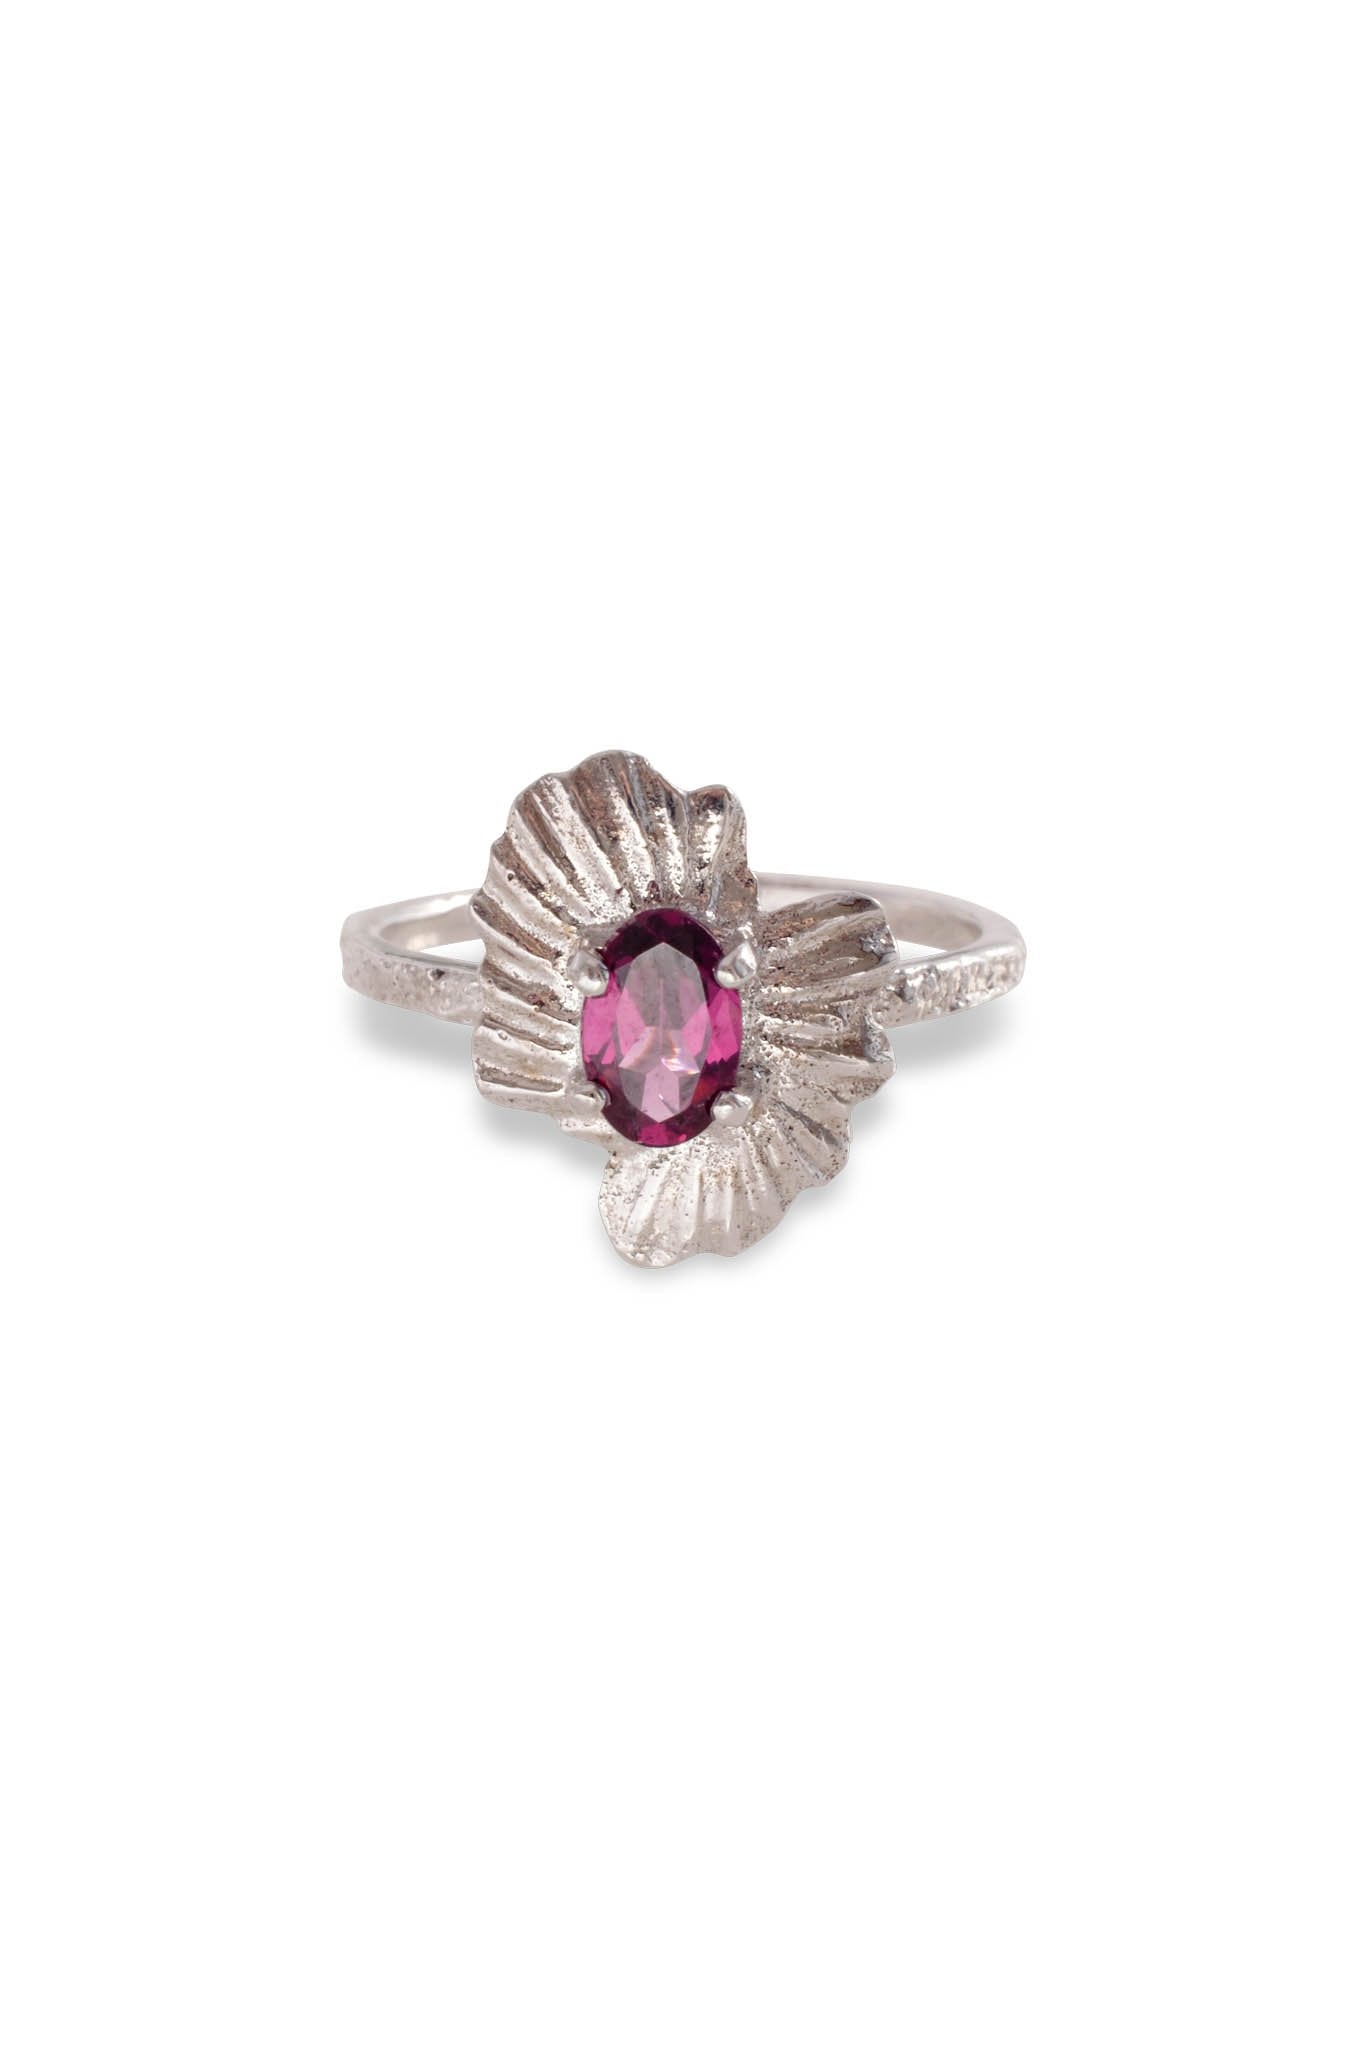 One of a Kind ~ Oval Starburst Shell Moss Textured Ring in White Gold - Alexandra Mosher Studio Jewellery Bermuda Fine